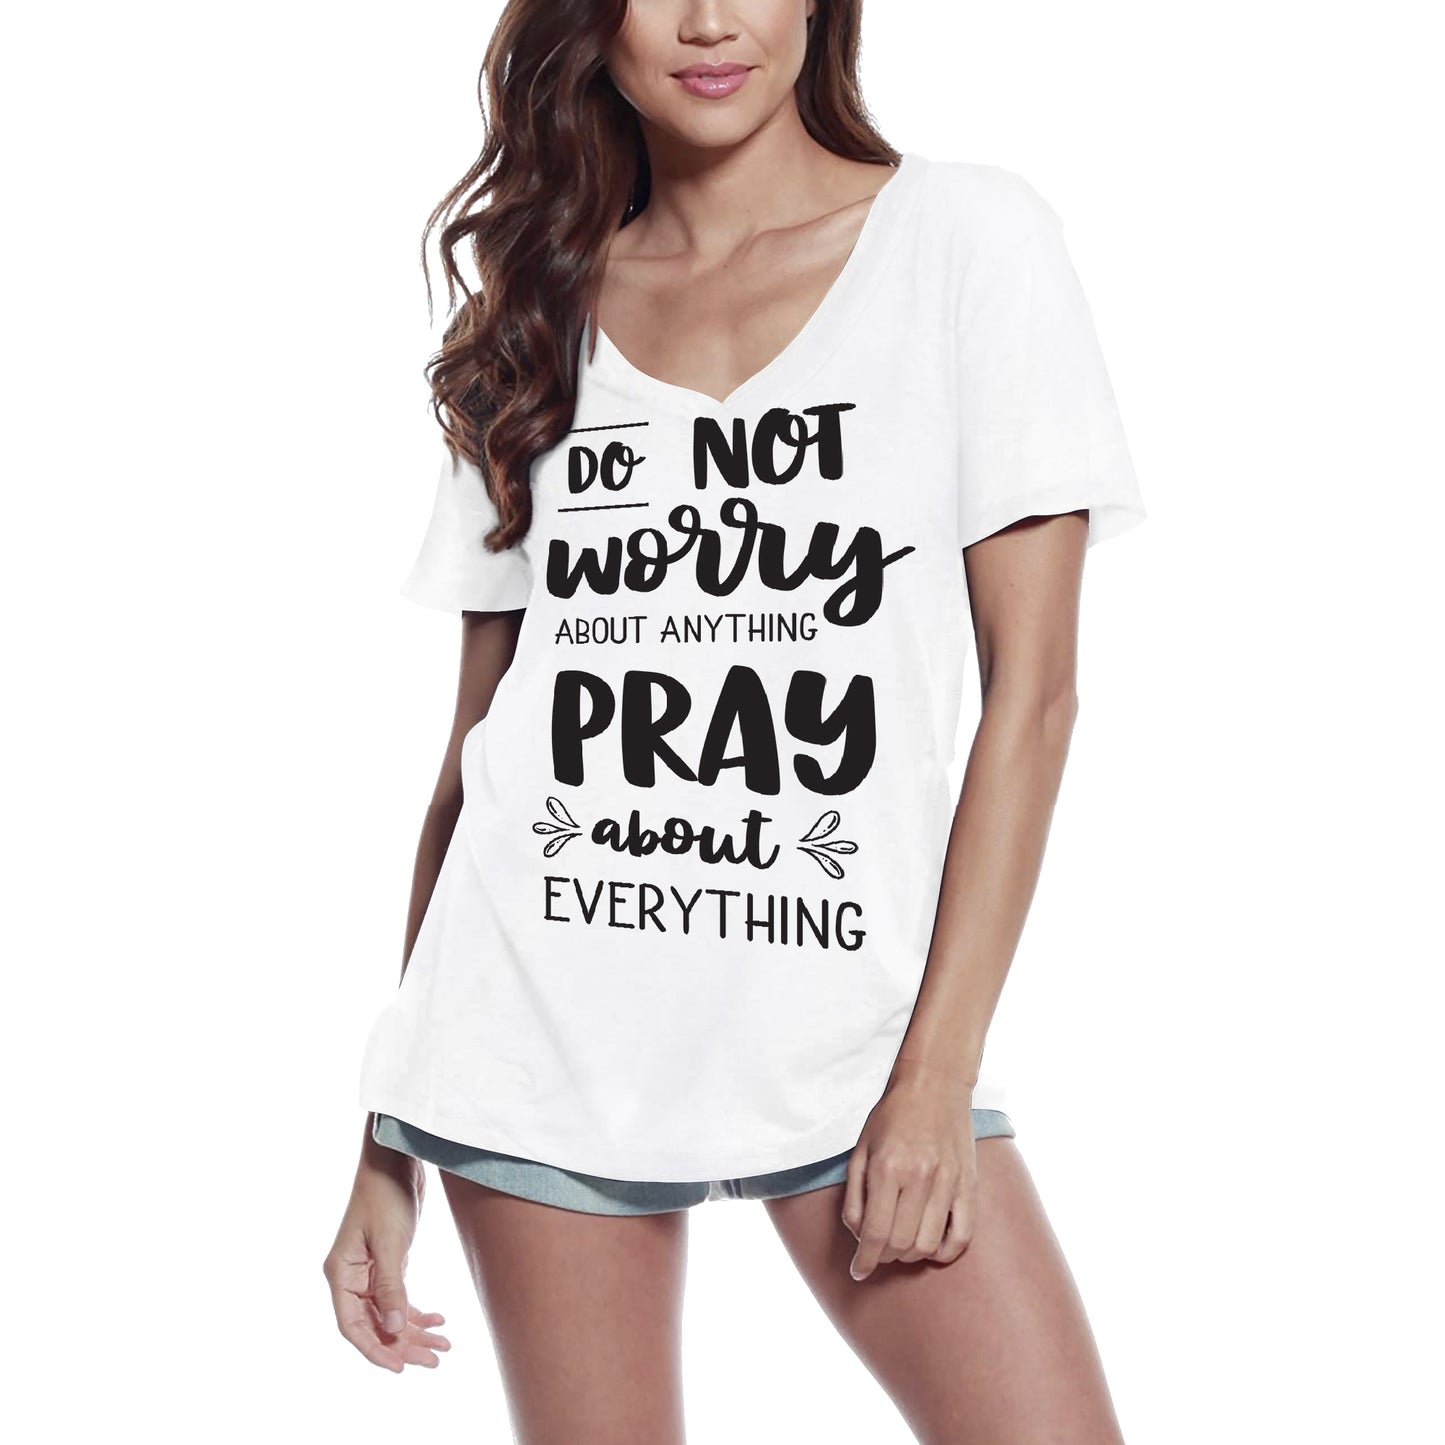 ULTRABASIC Women's T-Shirt Do Not Worry About Anything Pray About Everything Tops